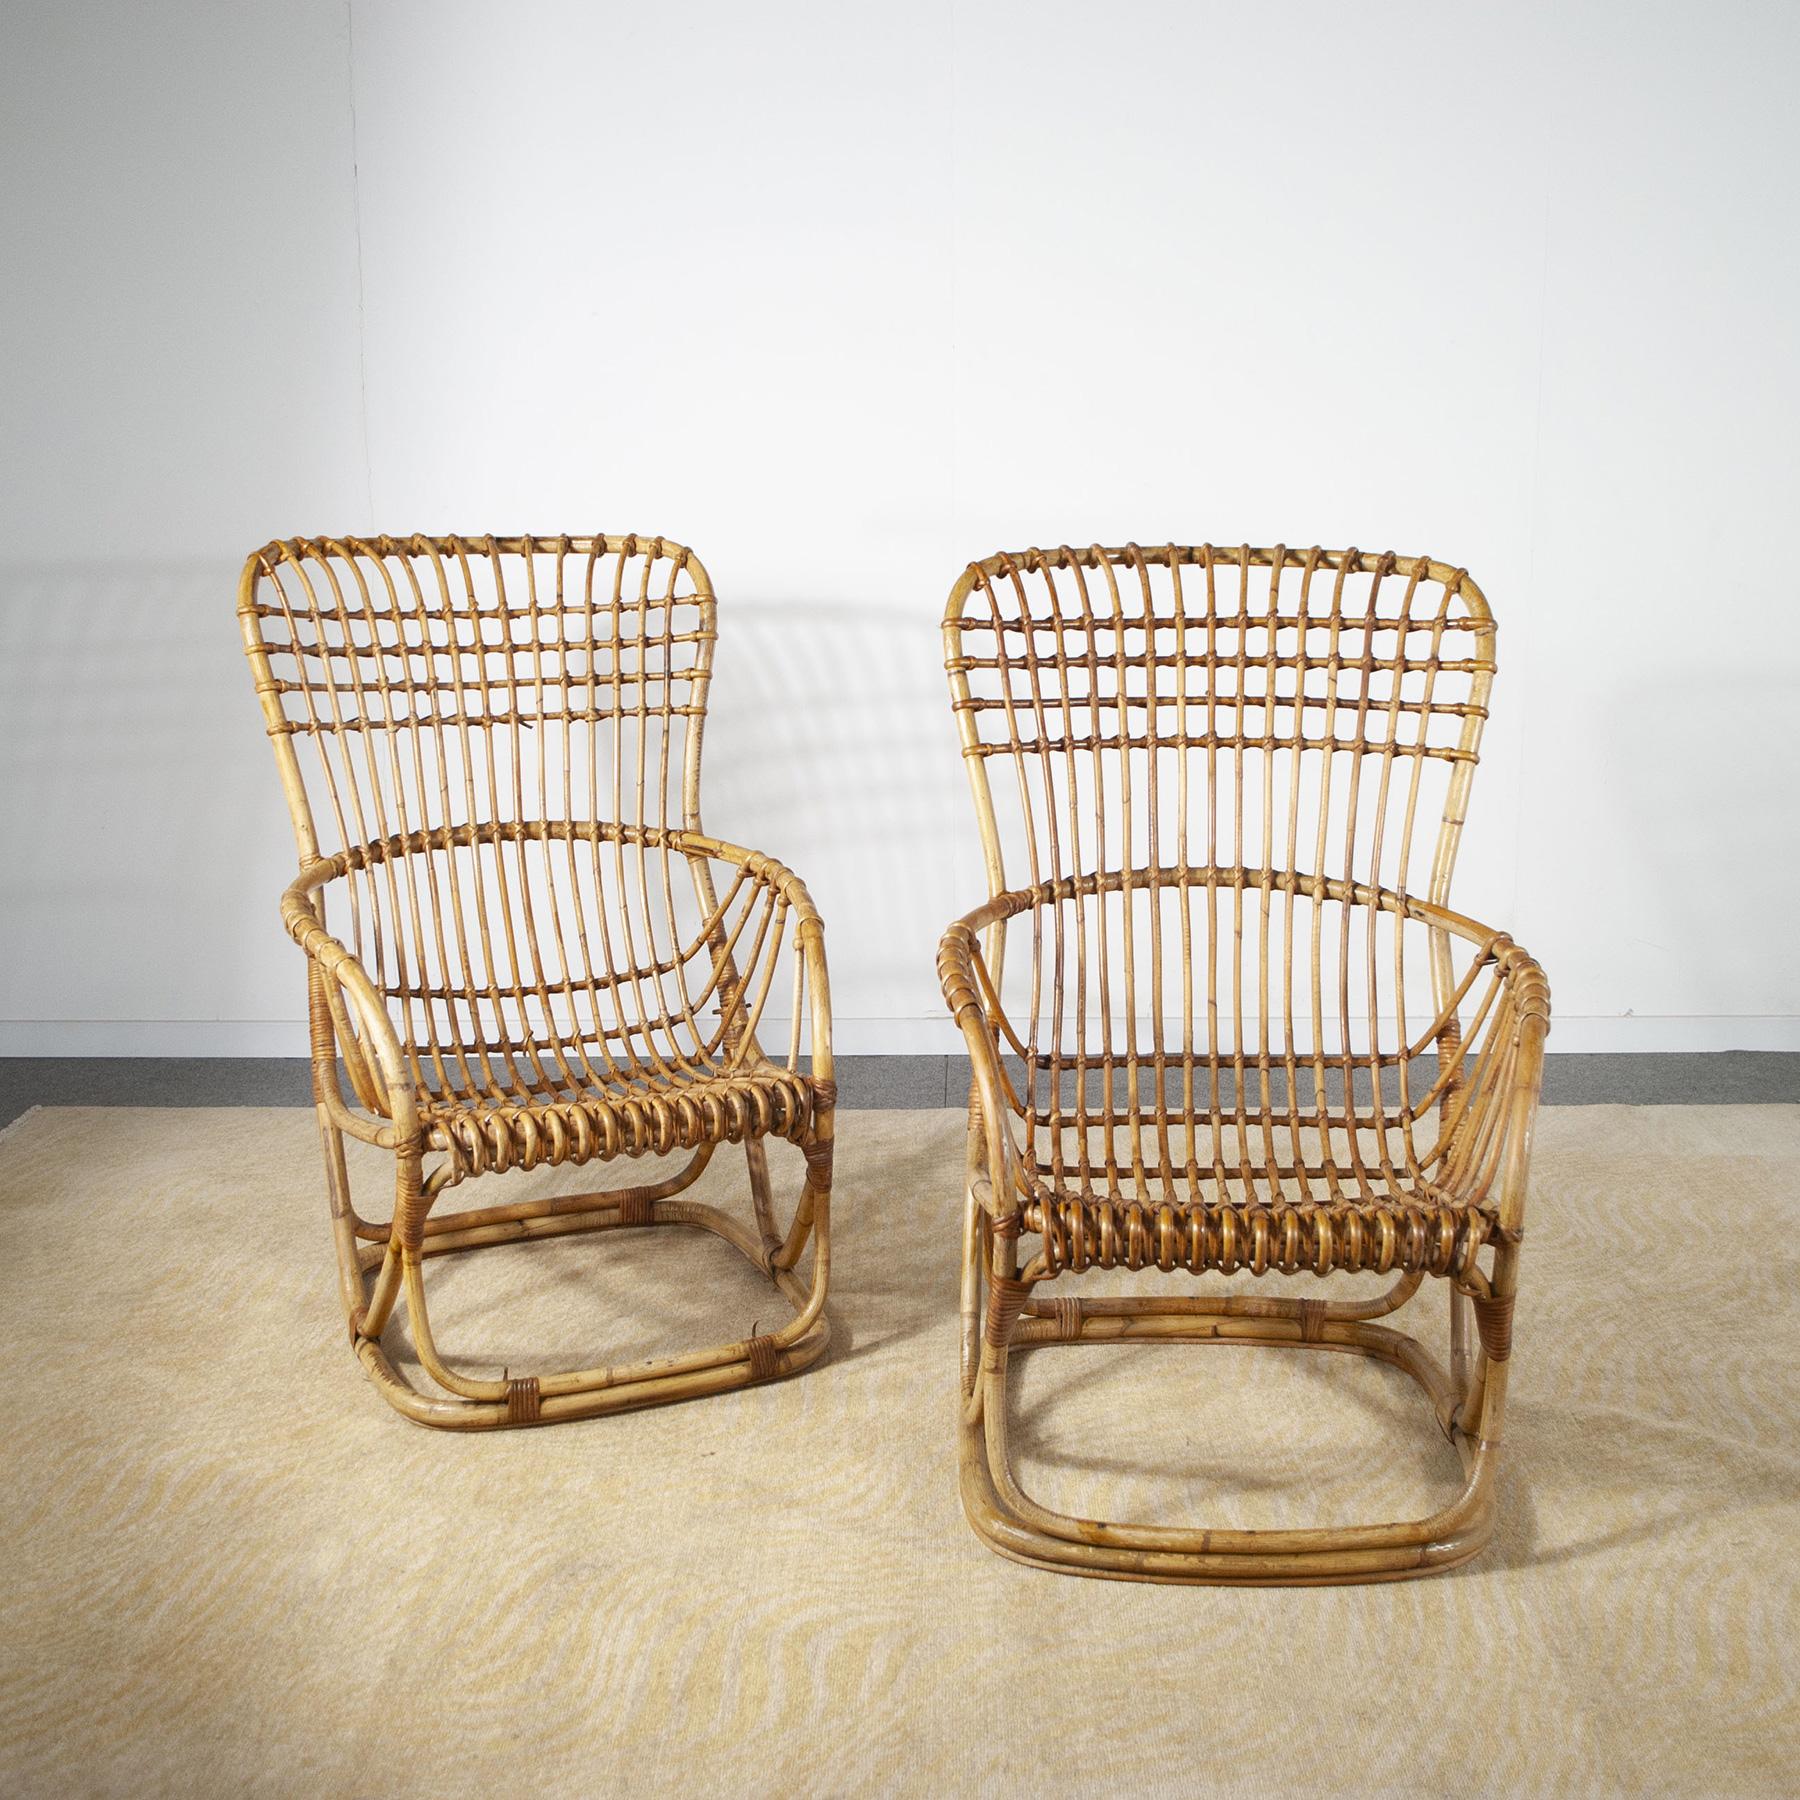 A set of two armchairs in the style of Tito Agnoli for Bonacin in bamboo and cane.